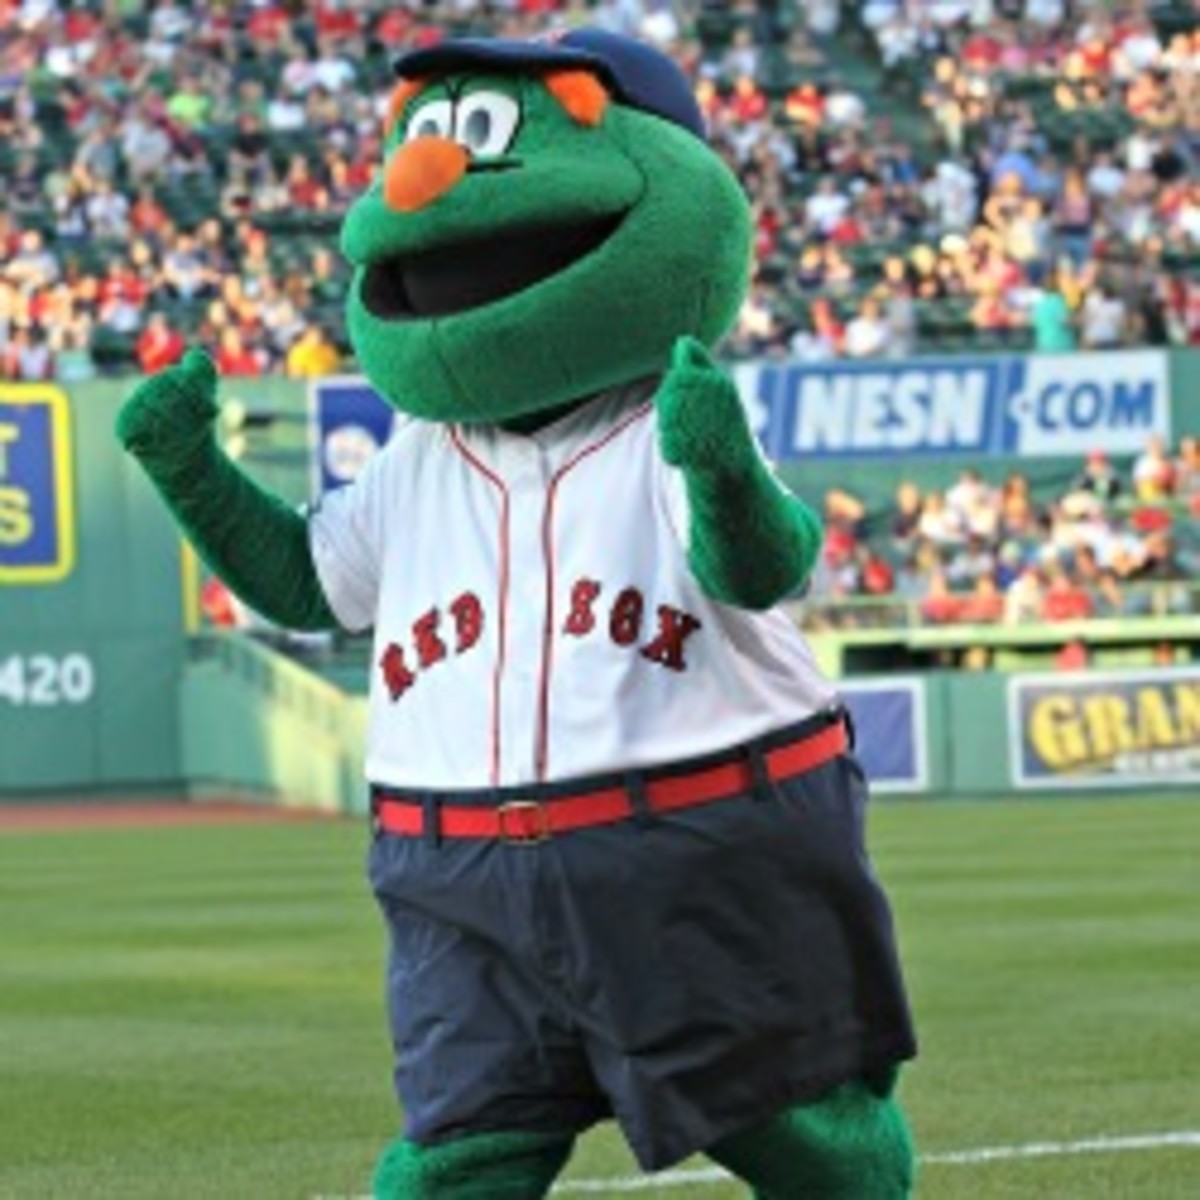 Boston police: Red Sox mascot Wally the Green Monster missing